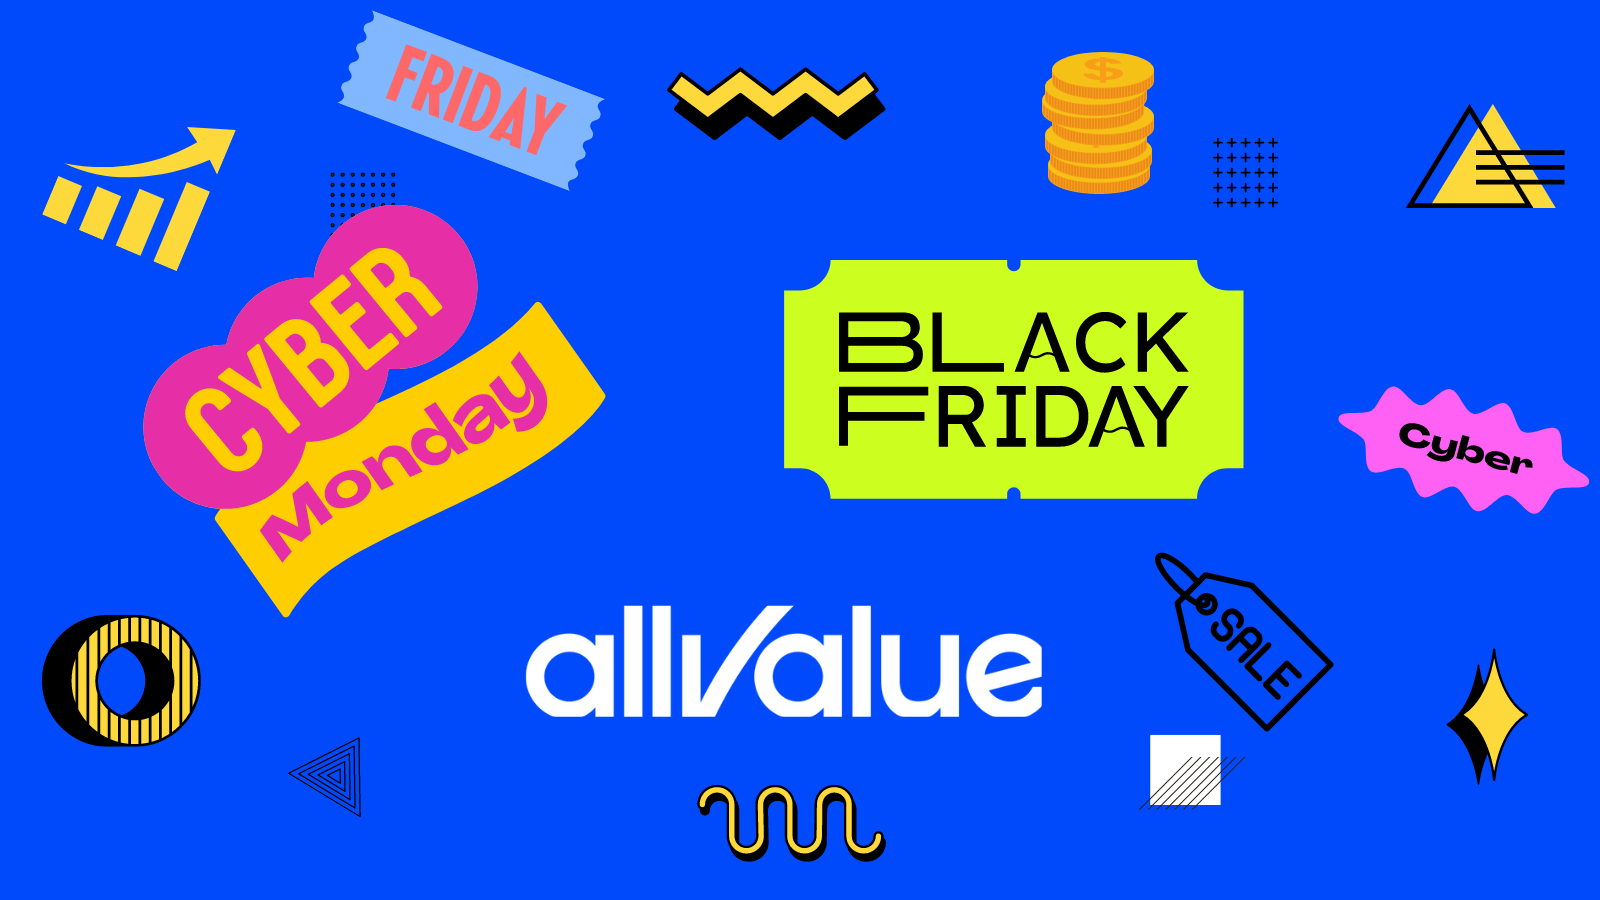 Get Black Friday Marketing Strategies Ready With AllValue